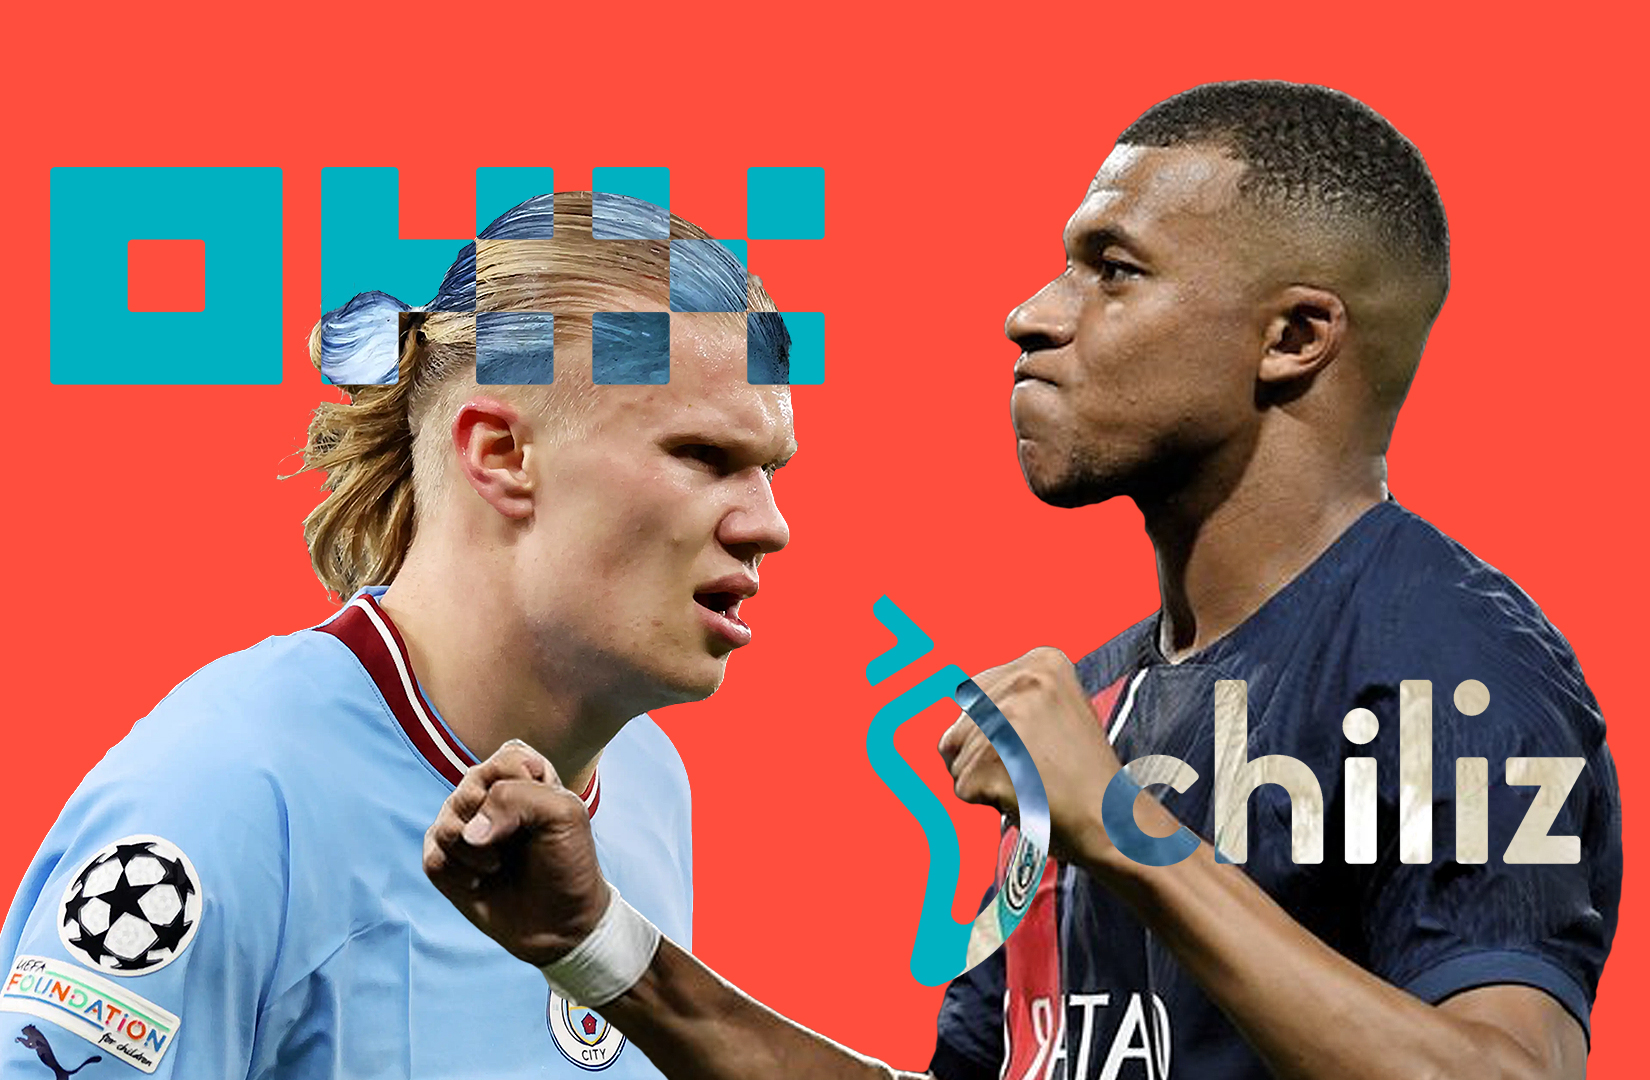 OKX makes a play in $3.7bn sports coin market with Chiliz Chain deal